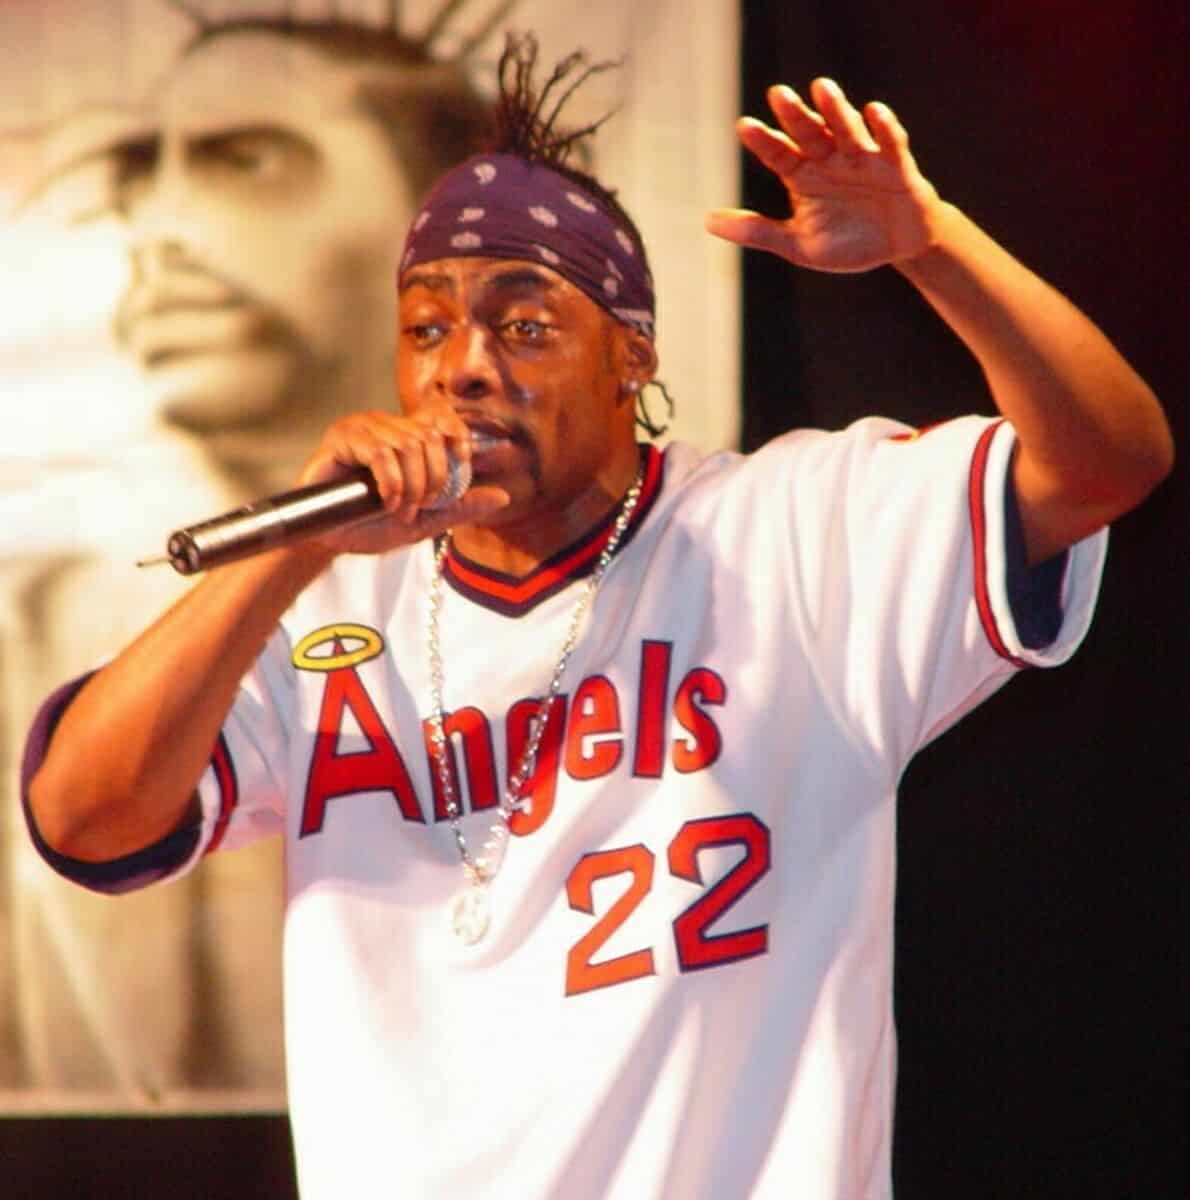 Coolio Net Worth Details, Personal Info